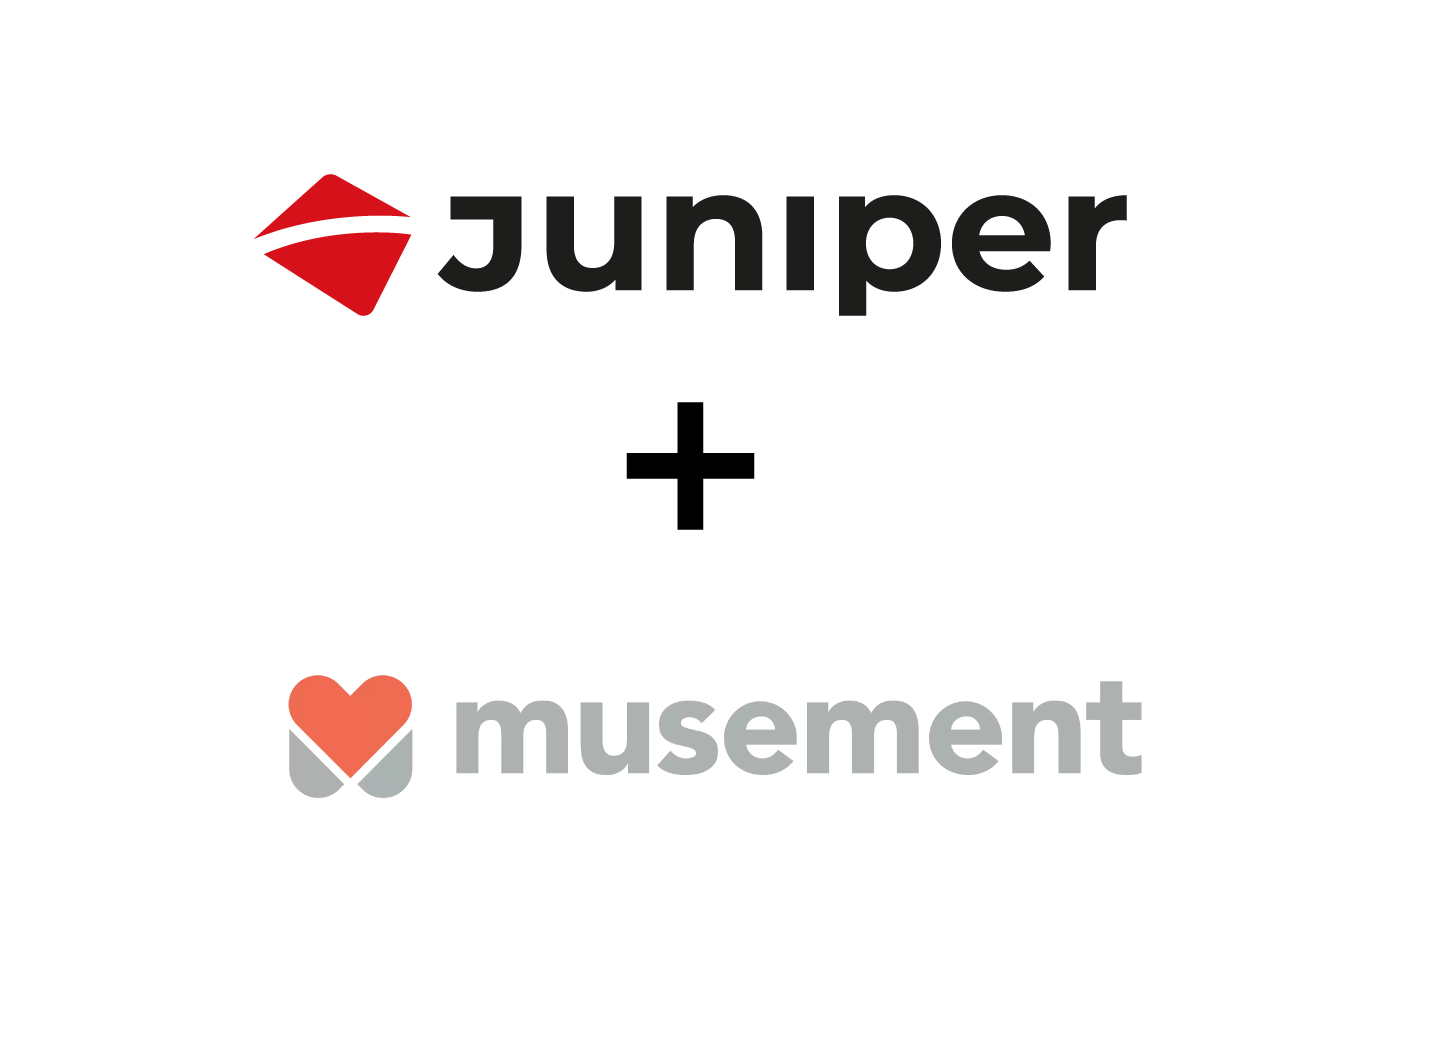 Juniper expands its XML network with TUI Musement